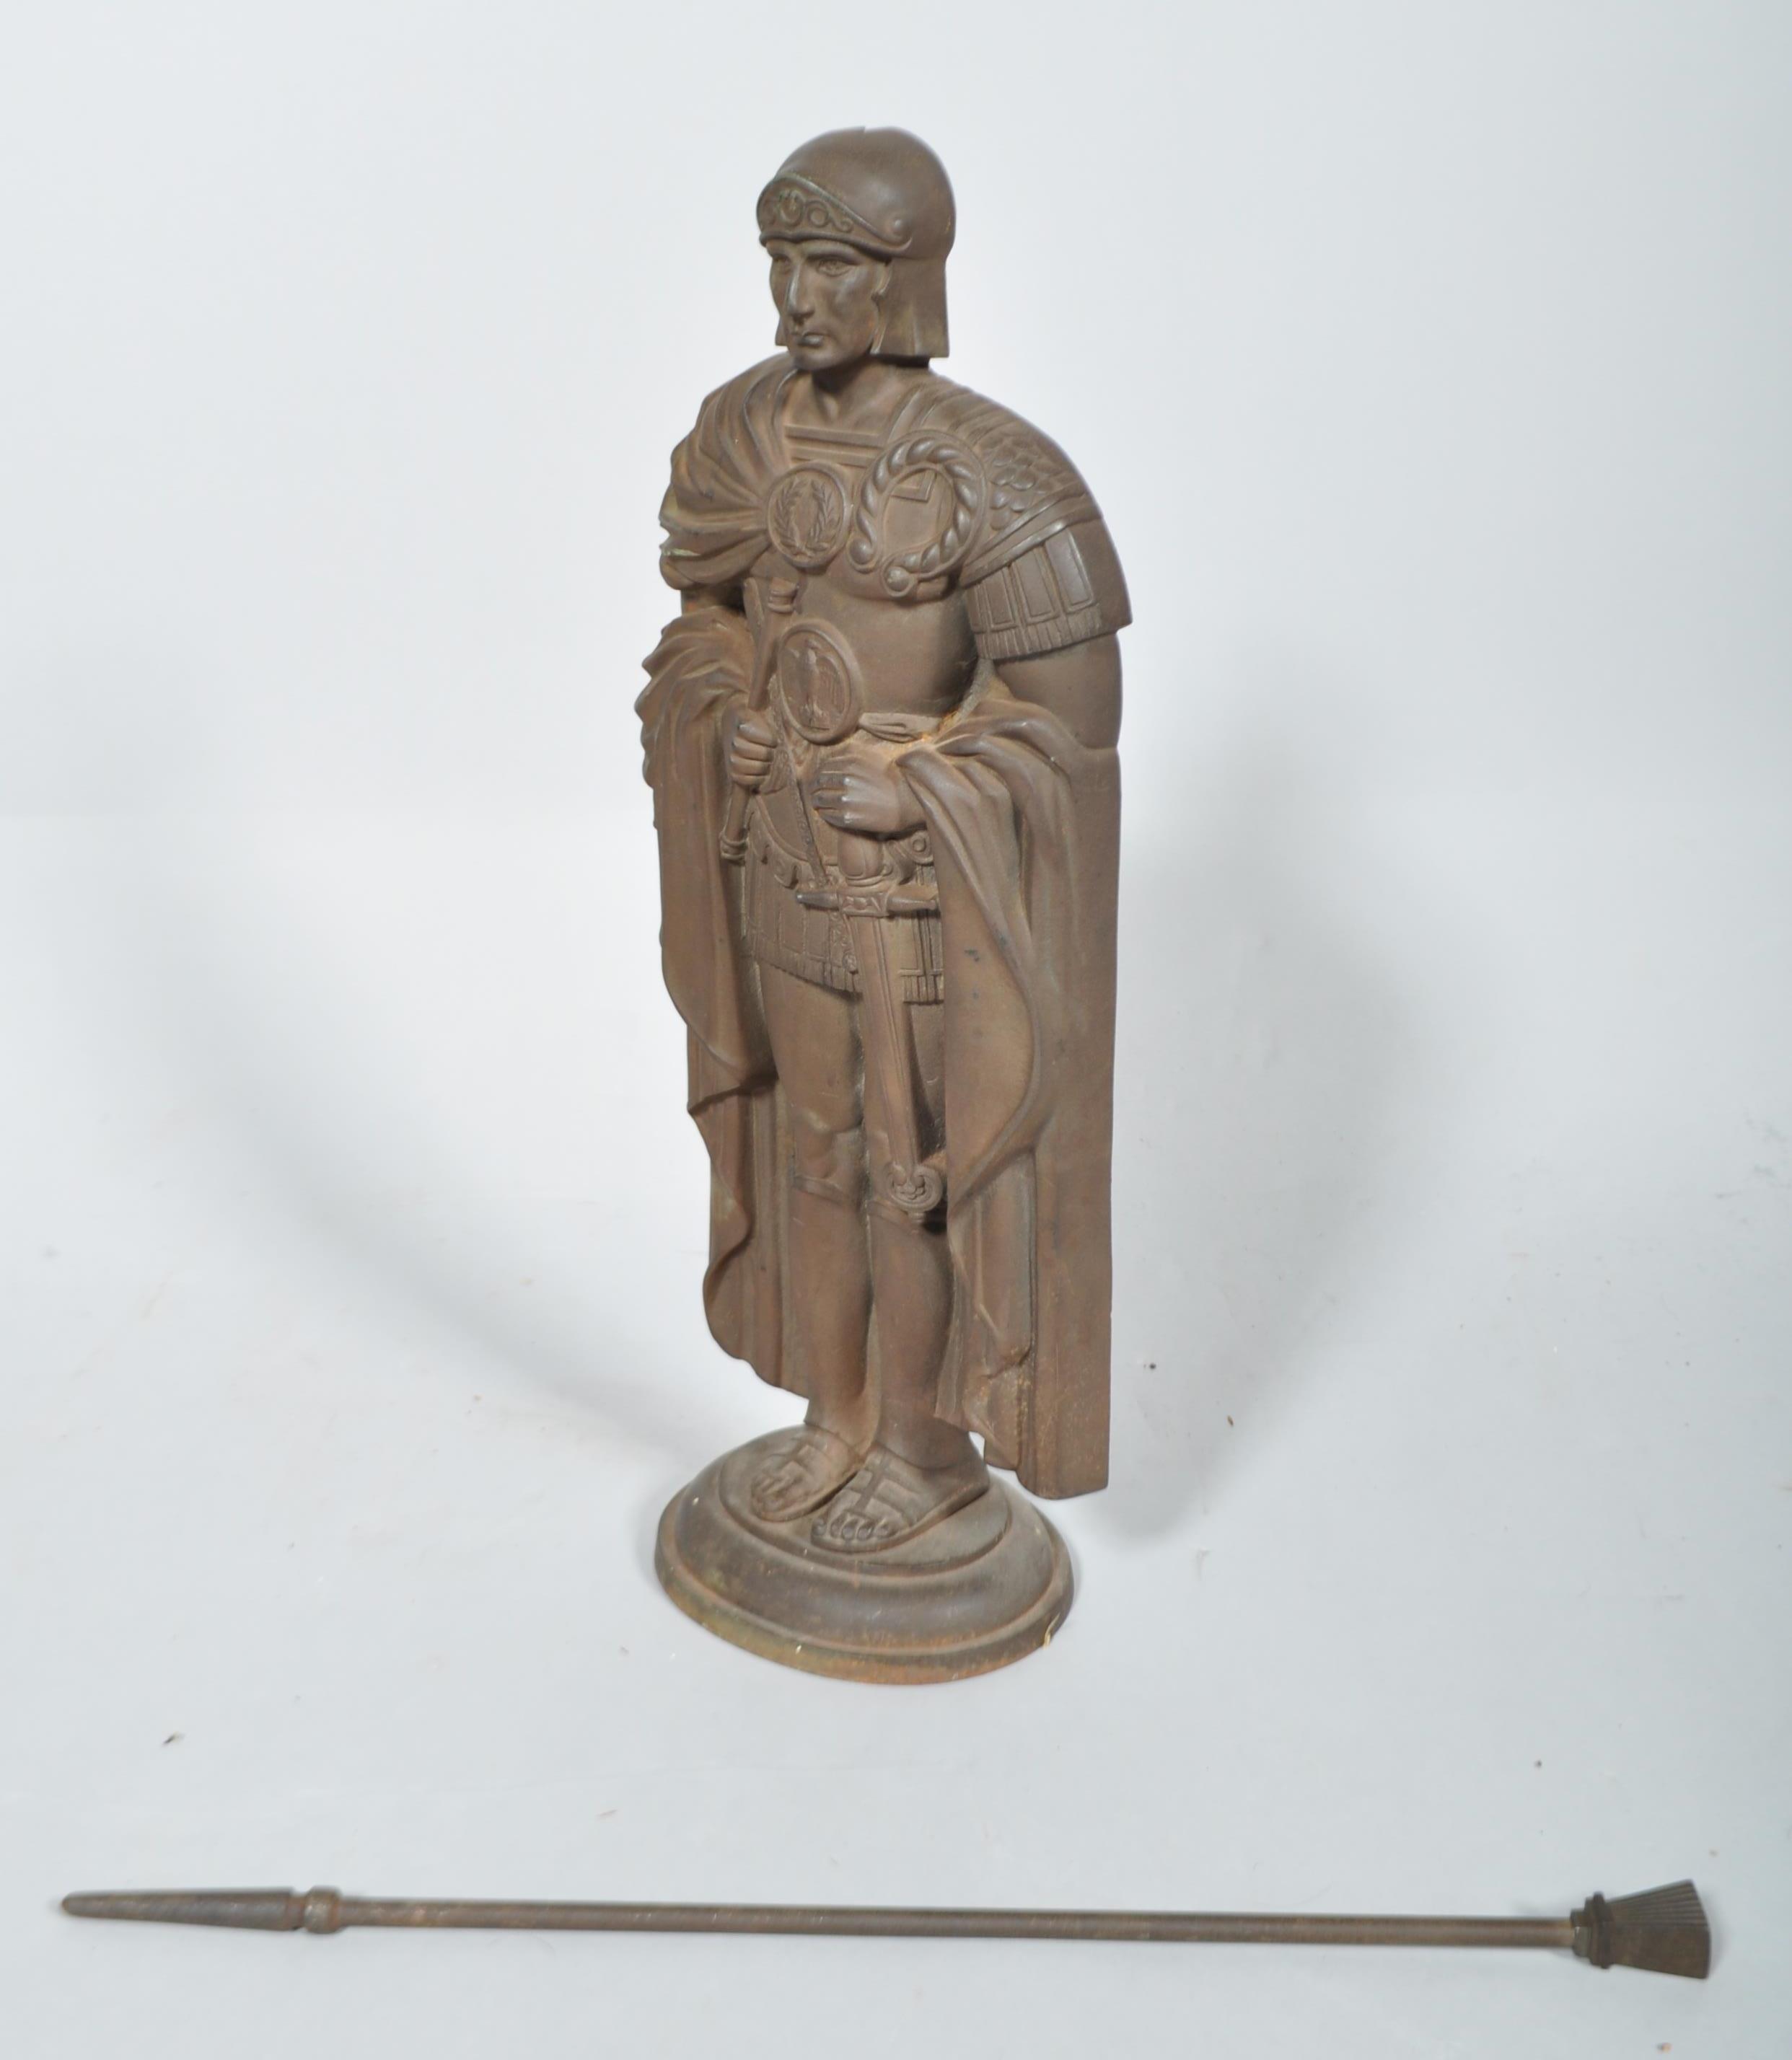 A cast iron fire companion set cast as a Roman Centurion stand, his plumed helmet forming a poker, - Image 2 of 2